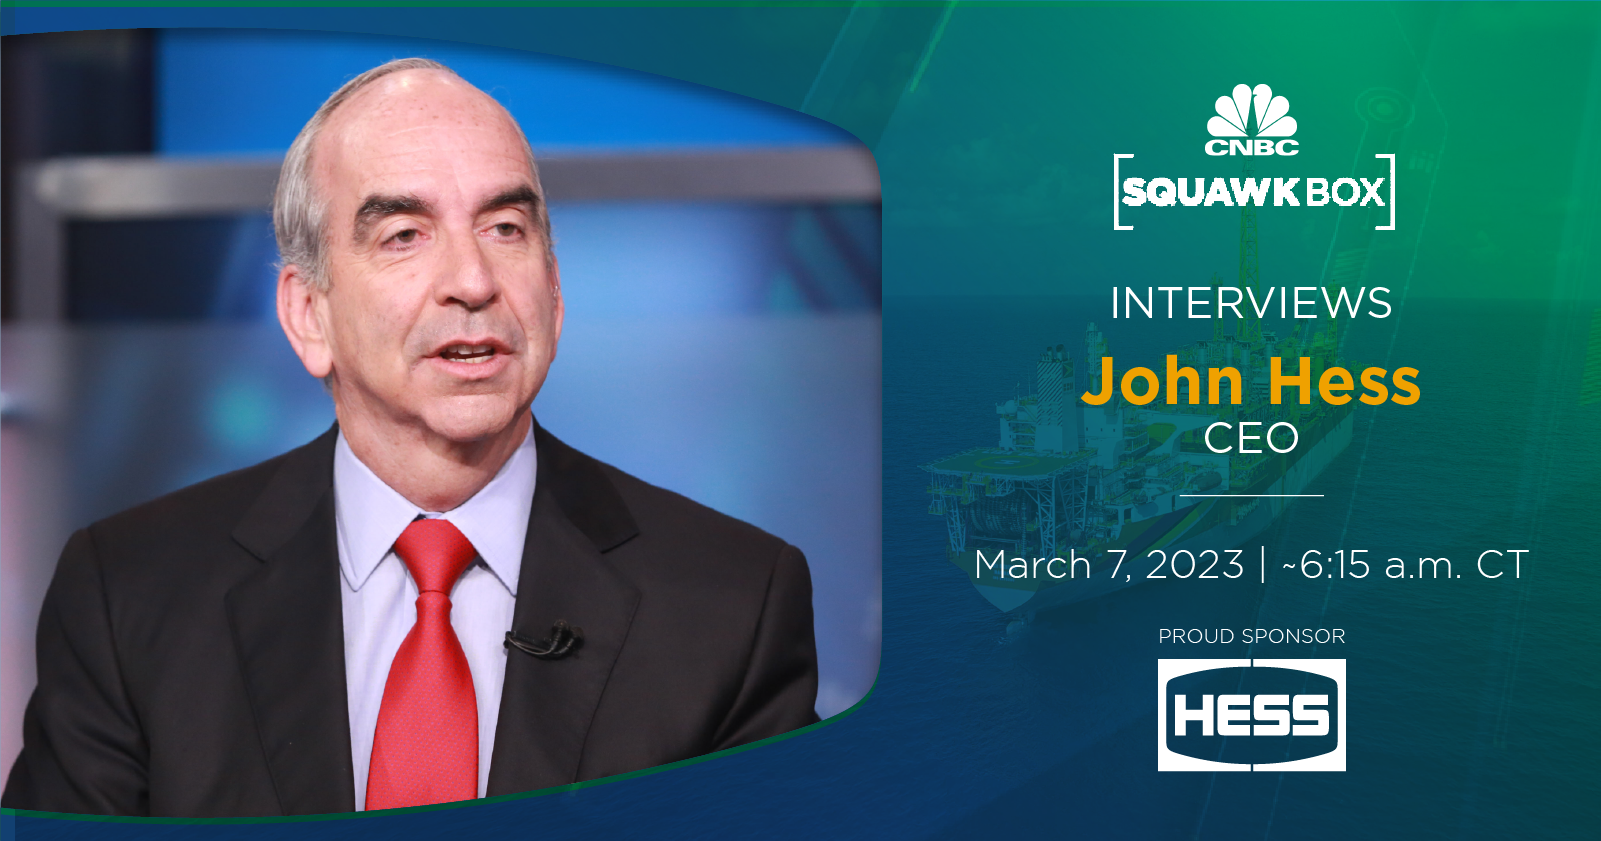 CEO John Hess&#160;Appears on CNBC’s Squawk Box&#160;